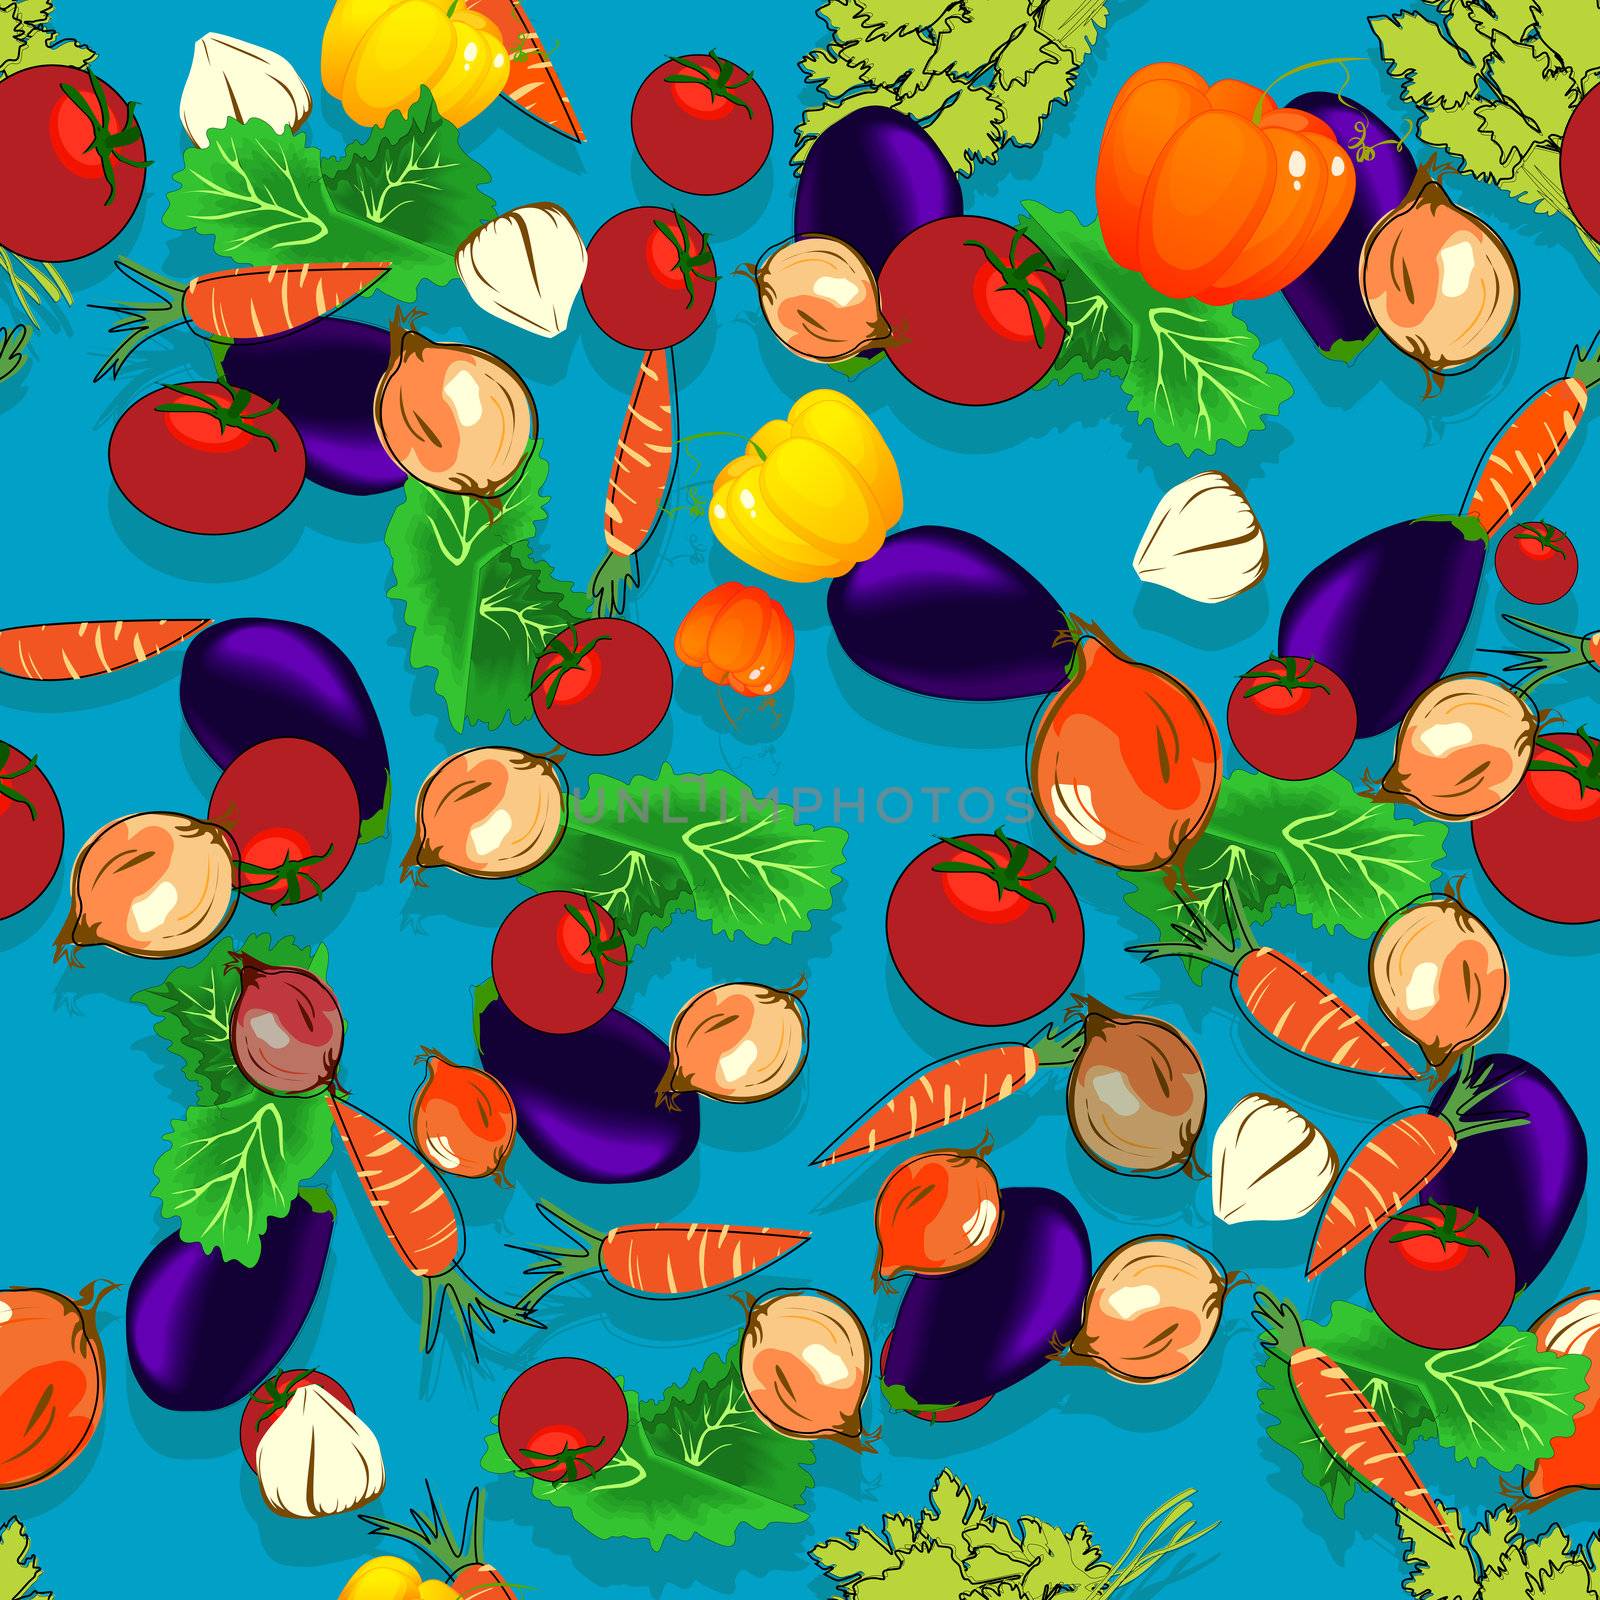 Simple vegetables pattern by Lirch